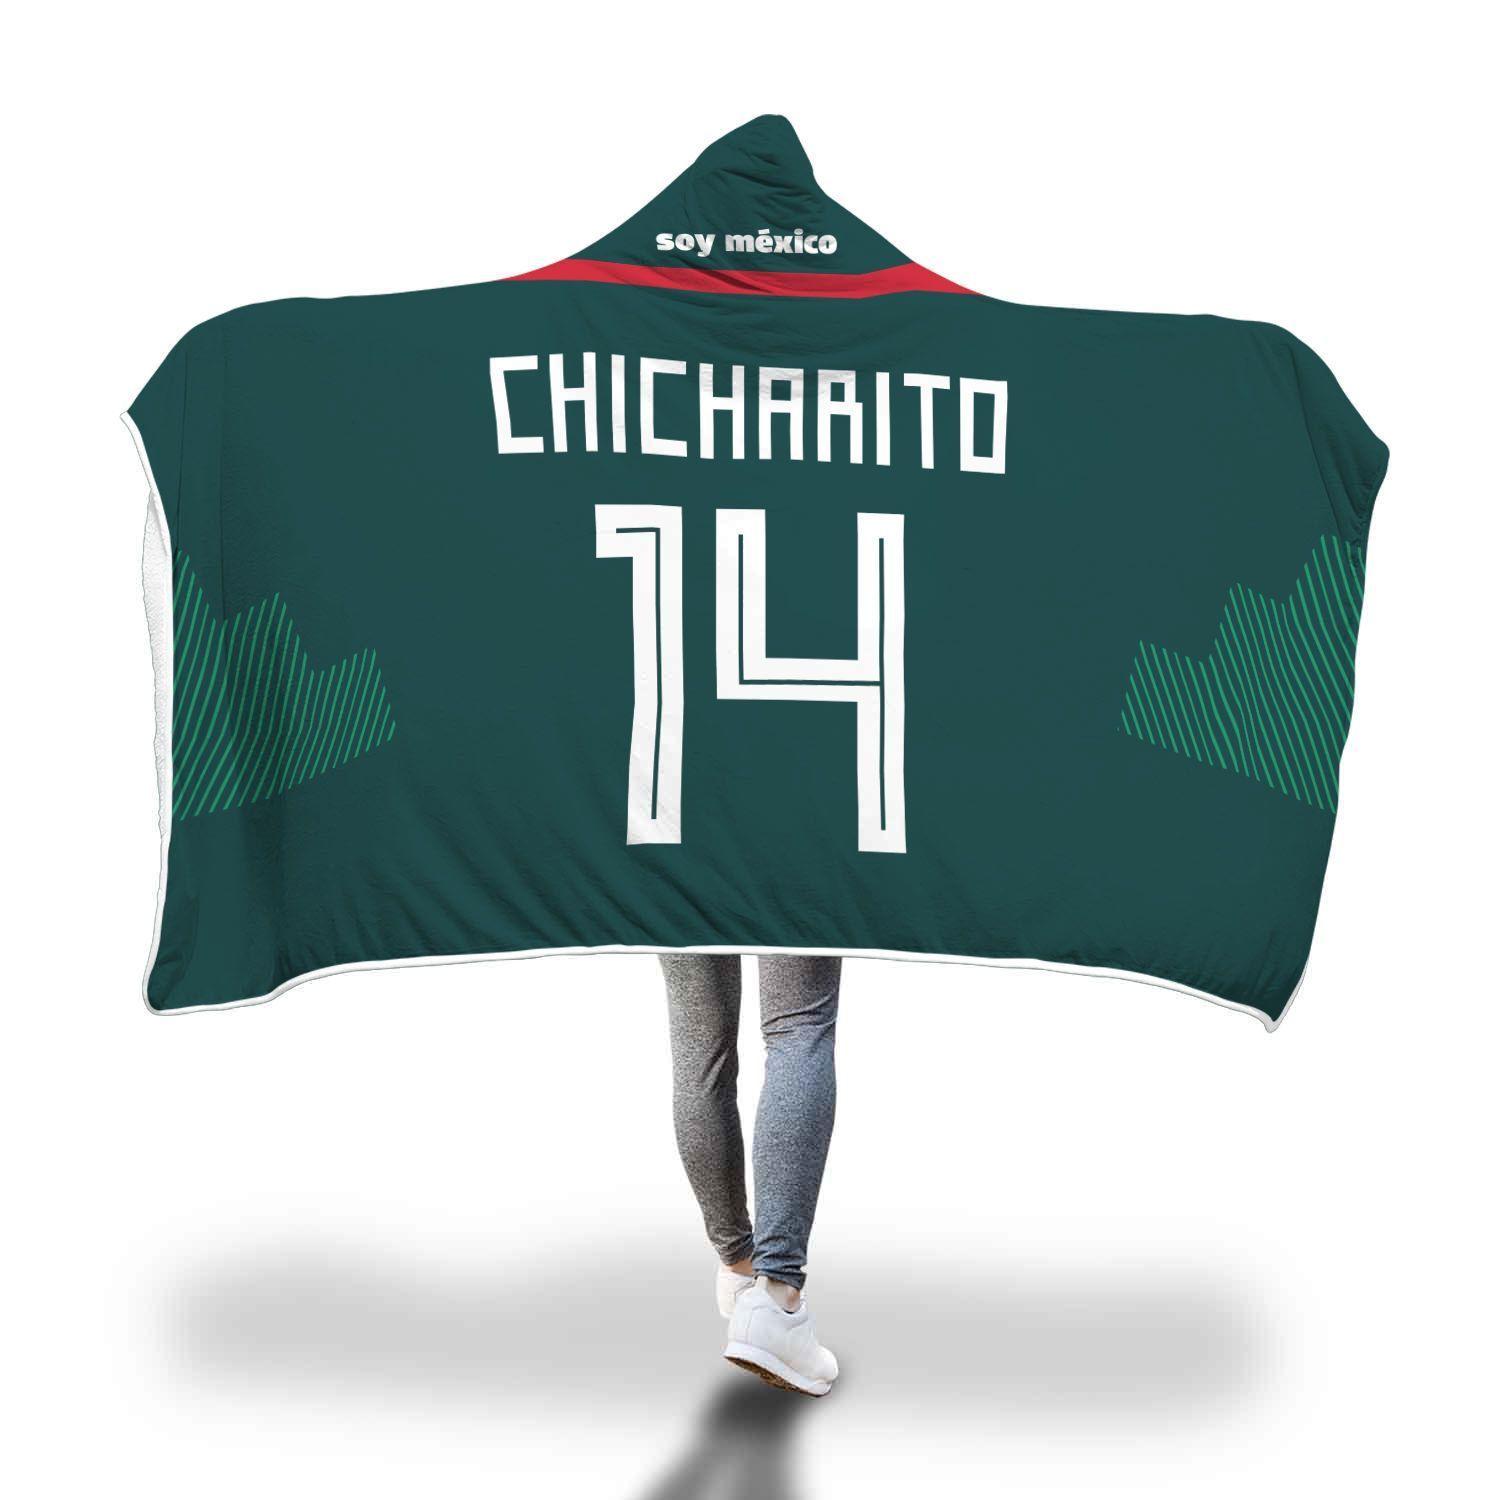 Chicharito Logo - Javier Chicharito Mexico Home Jersey 2018 Hooded Blanket - FIFA World Cup